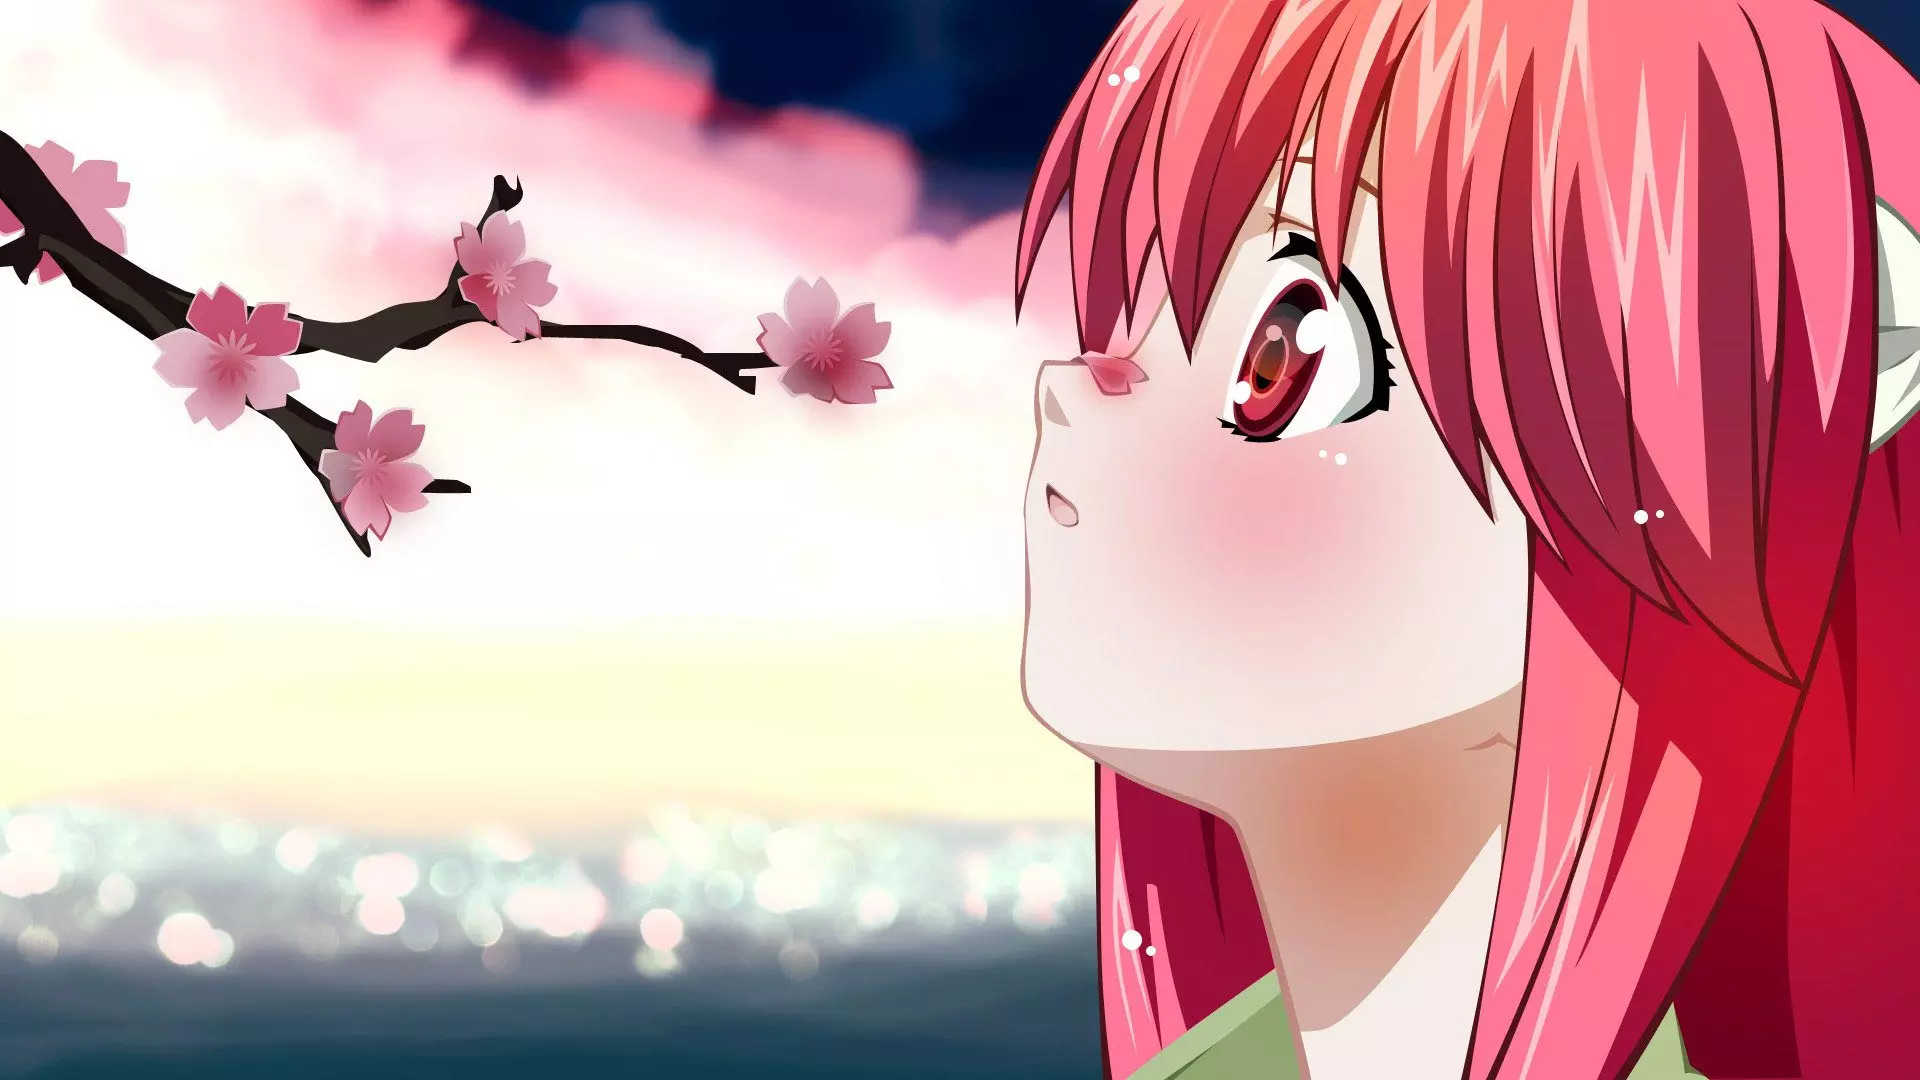 Lucy with pink hair next to the cherry blossoms in the fairy tale anime